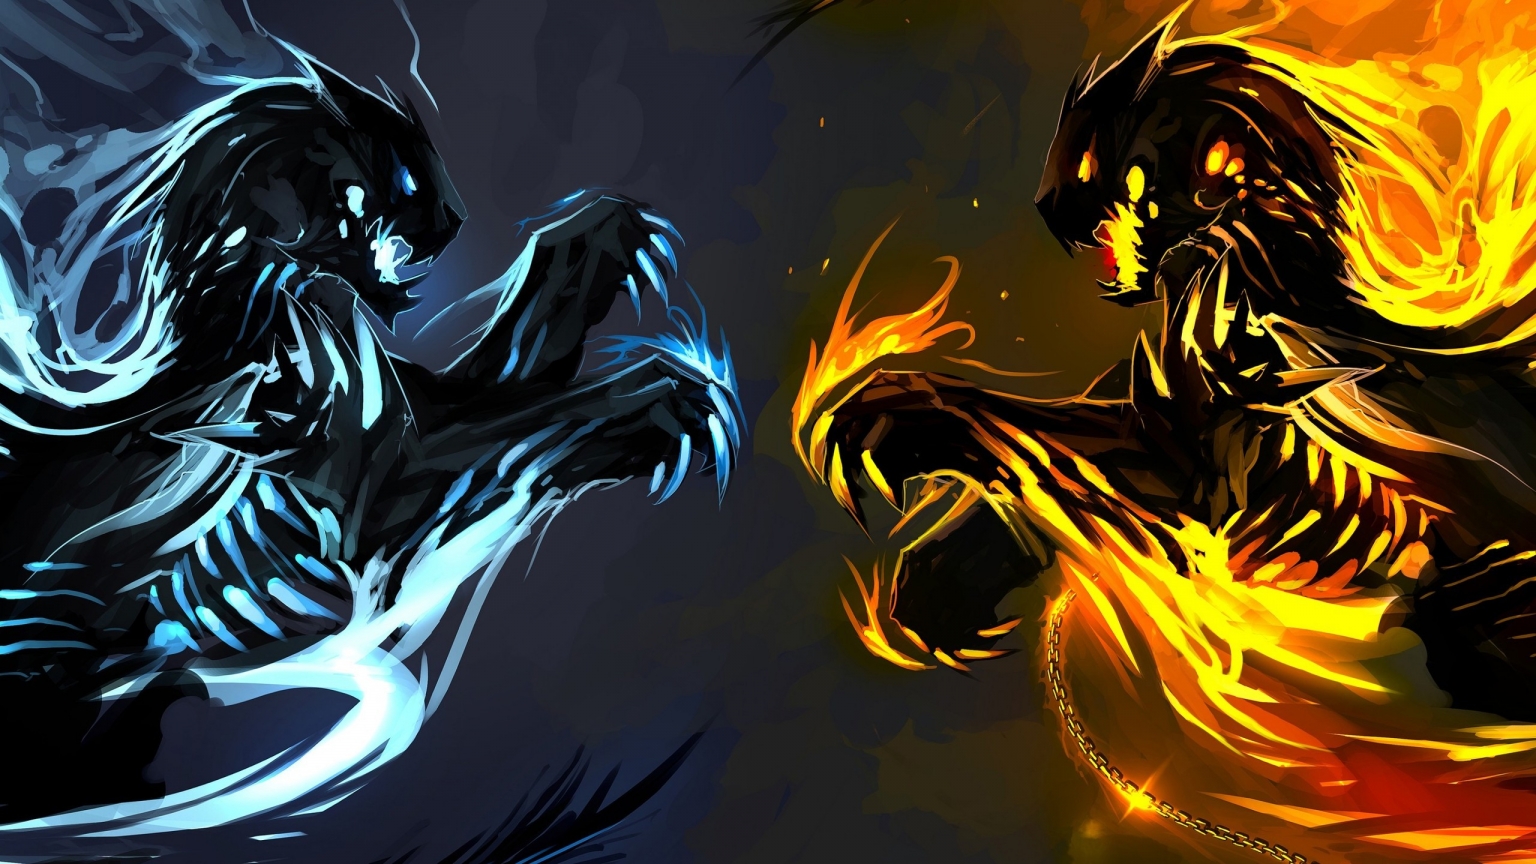 Ice and Fire Dragons for 1536 x 864 HDTV resolution